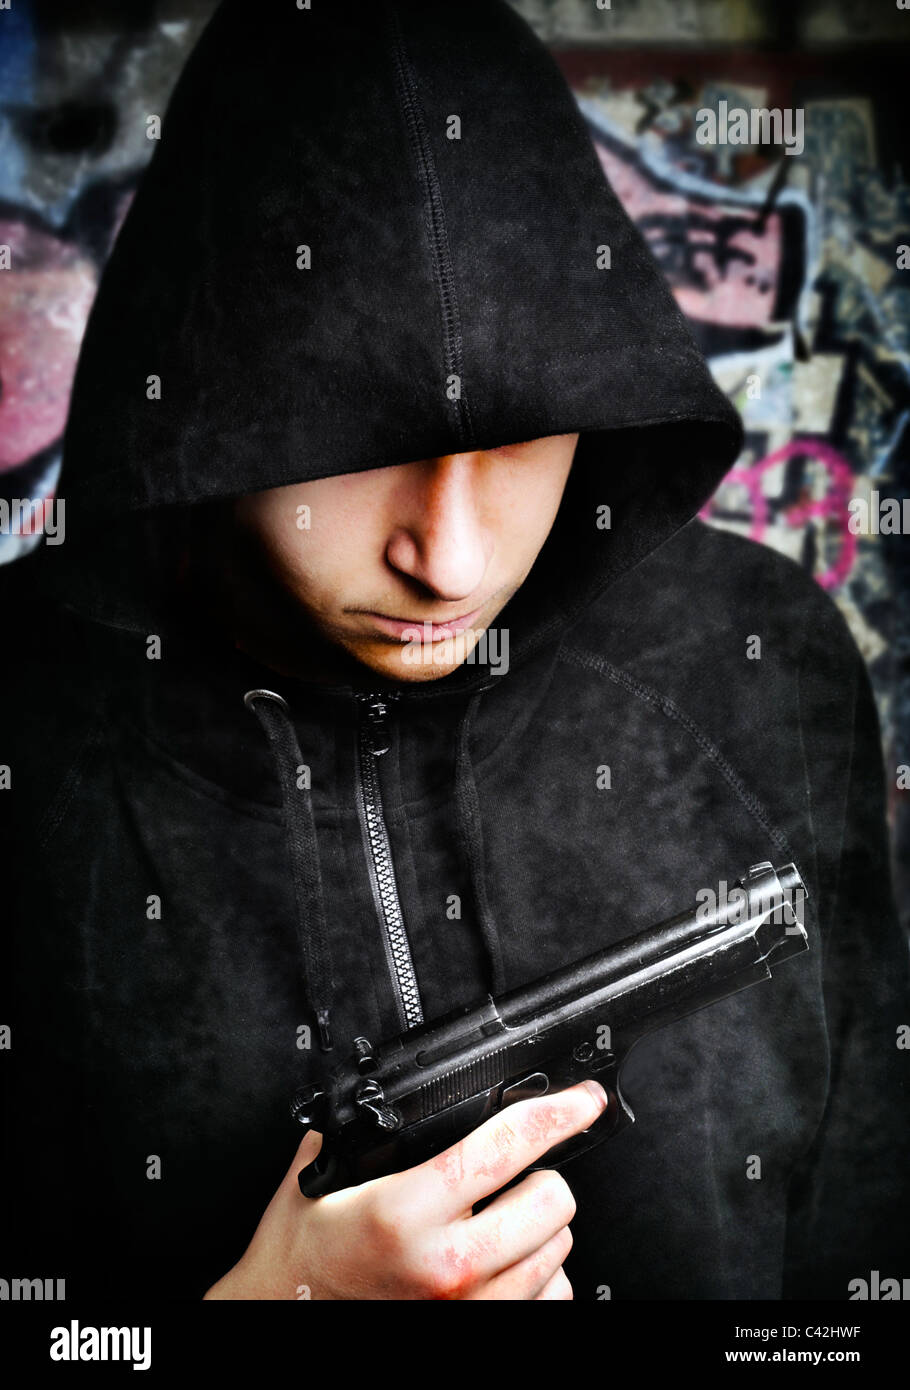 One young man with hand gun Stock Photo